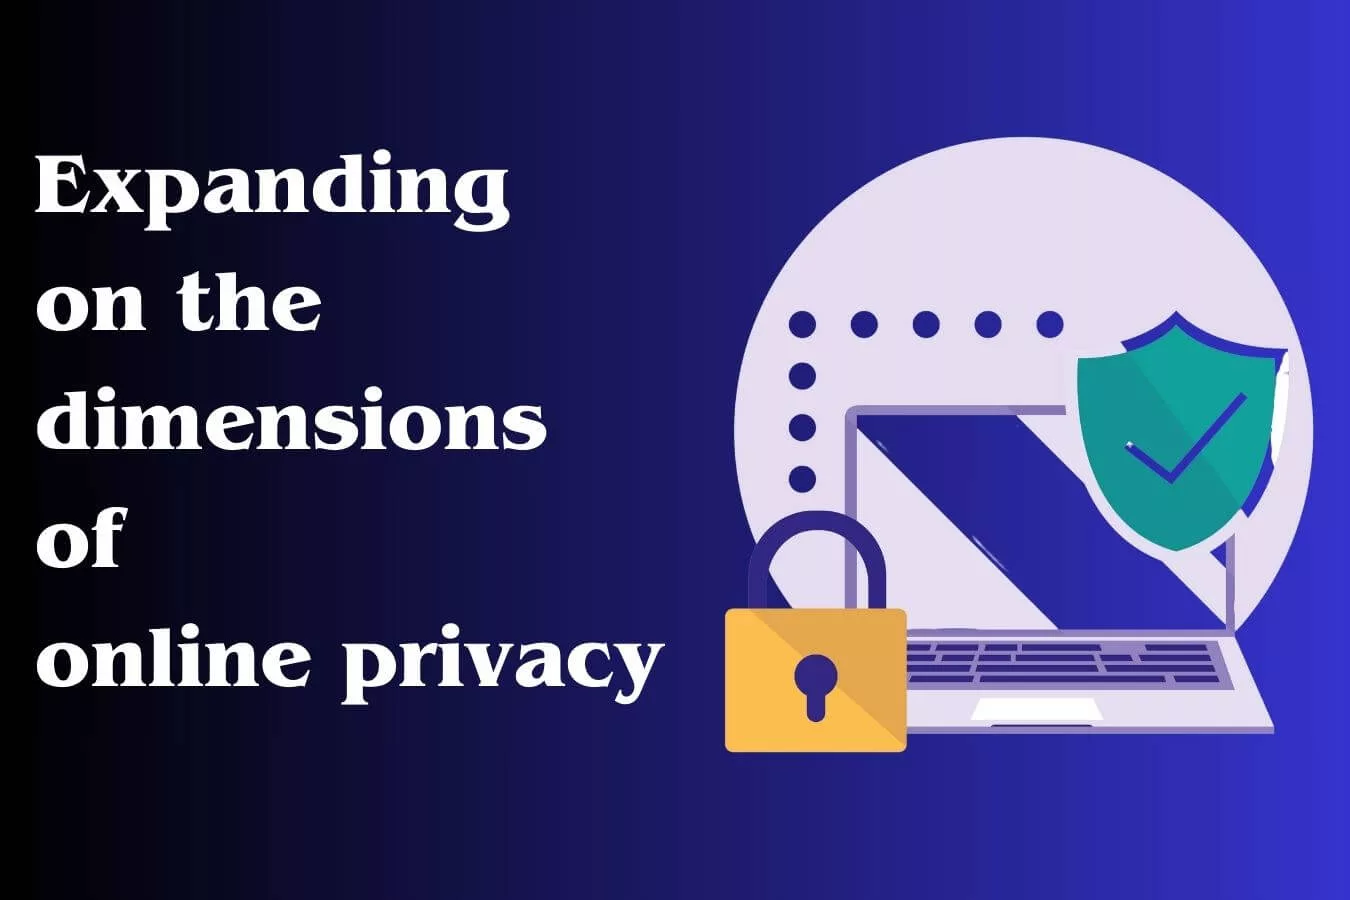 Expanding on the dimensions of online privacy